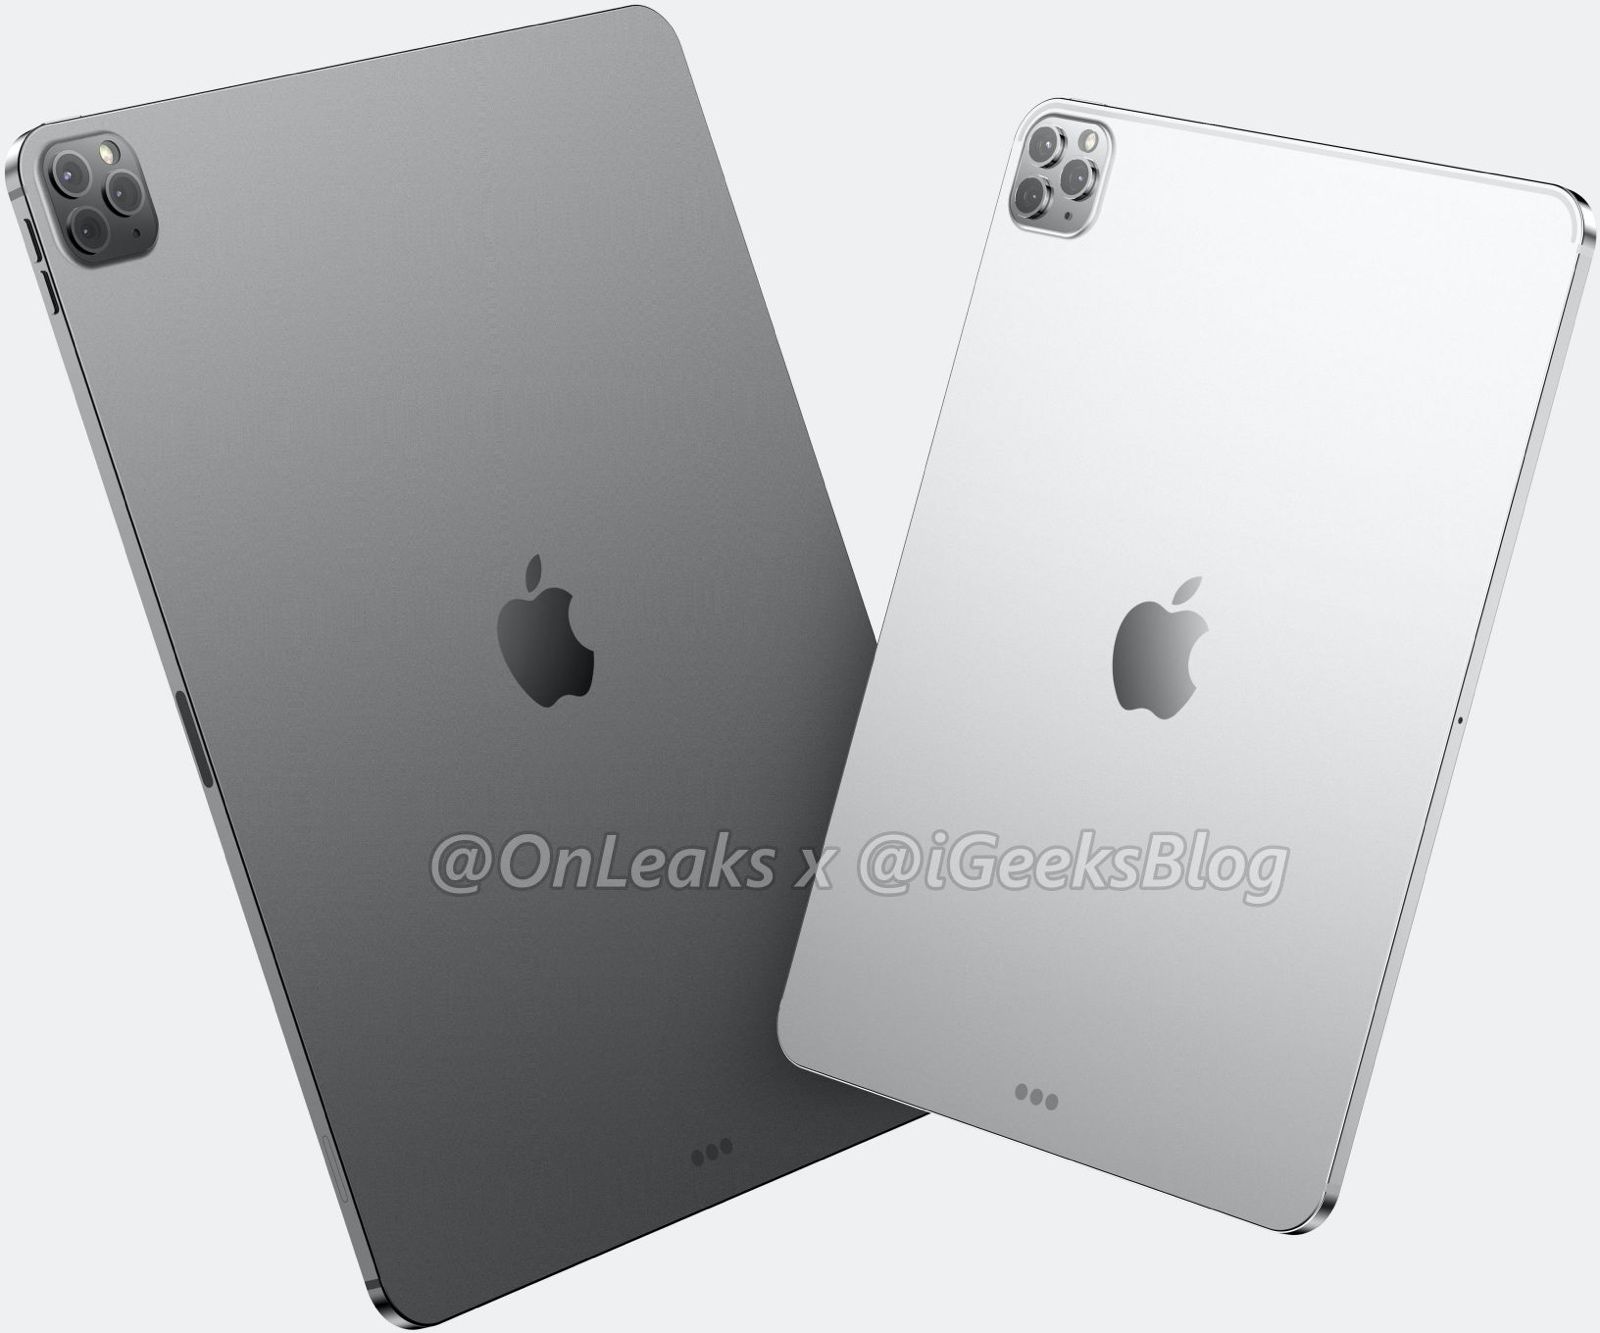 Renders Depict Alleged Design Of 2020 11 And 12 9 Inch Ipad Pro